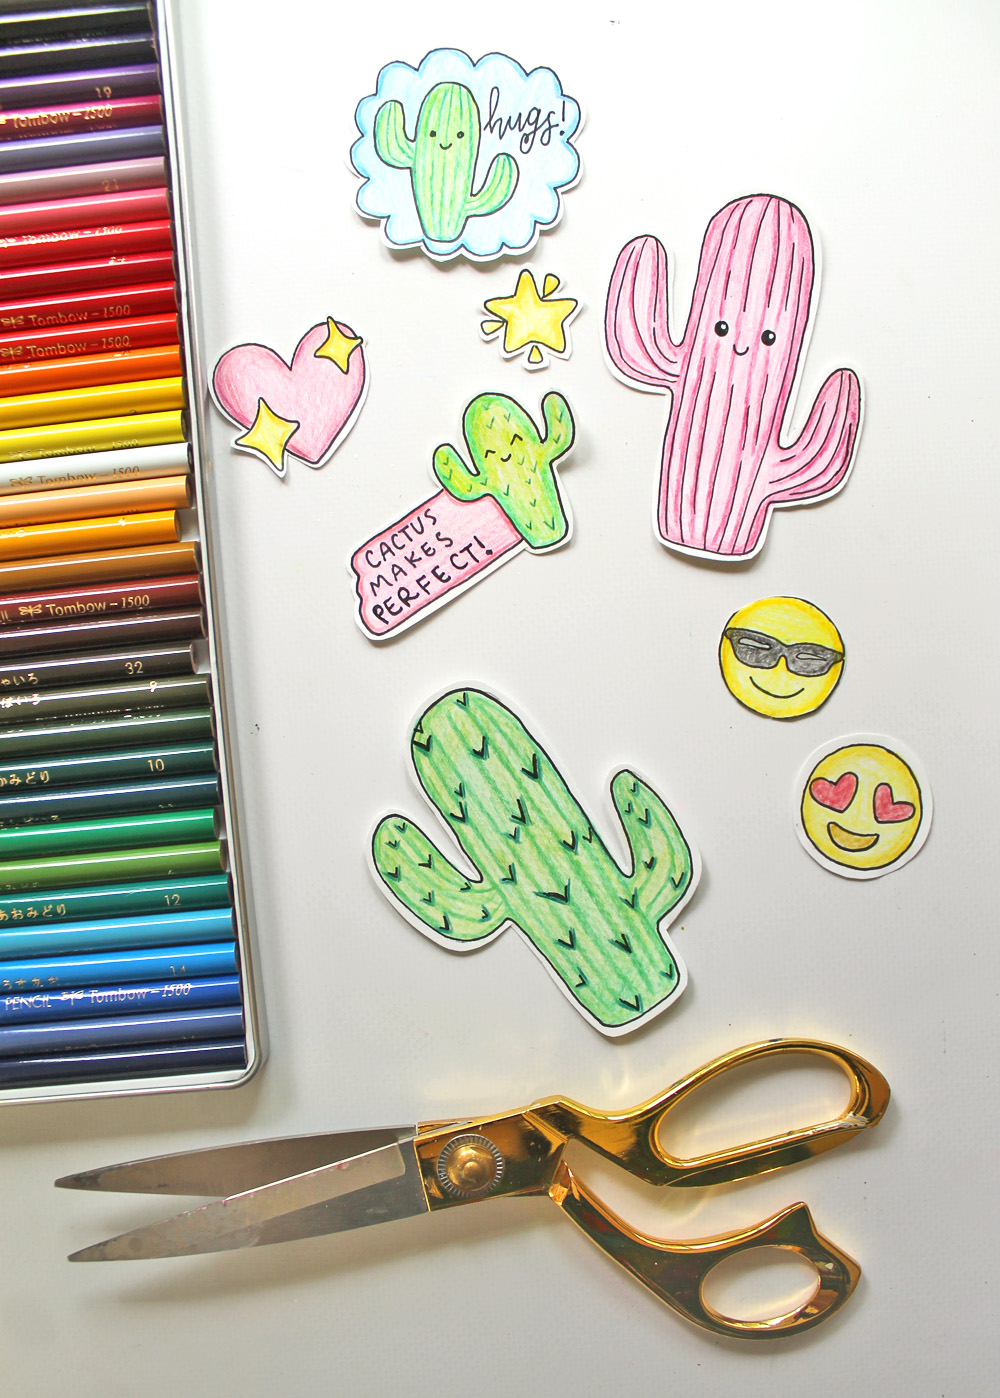 https://www.cc-pl.org/wp-content/uploads/2020/02/Katie_DIY-Cactus-Emoji-Stickers-with-Tombow-1500-Colored-Pencils-1.jpg